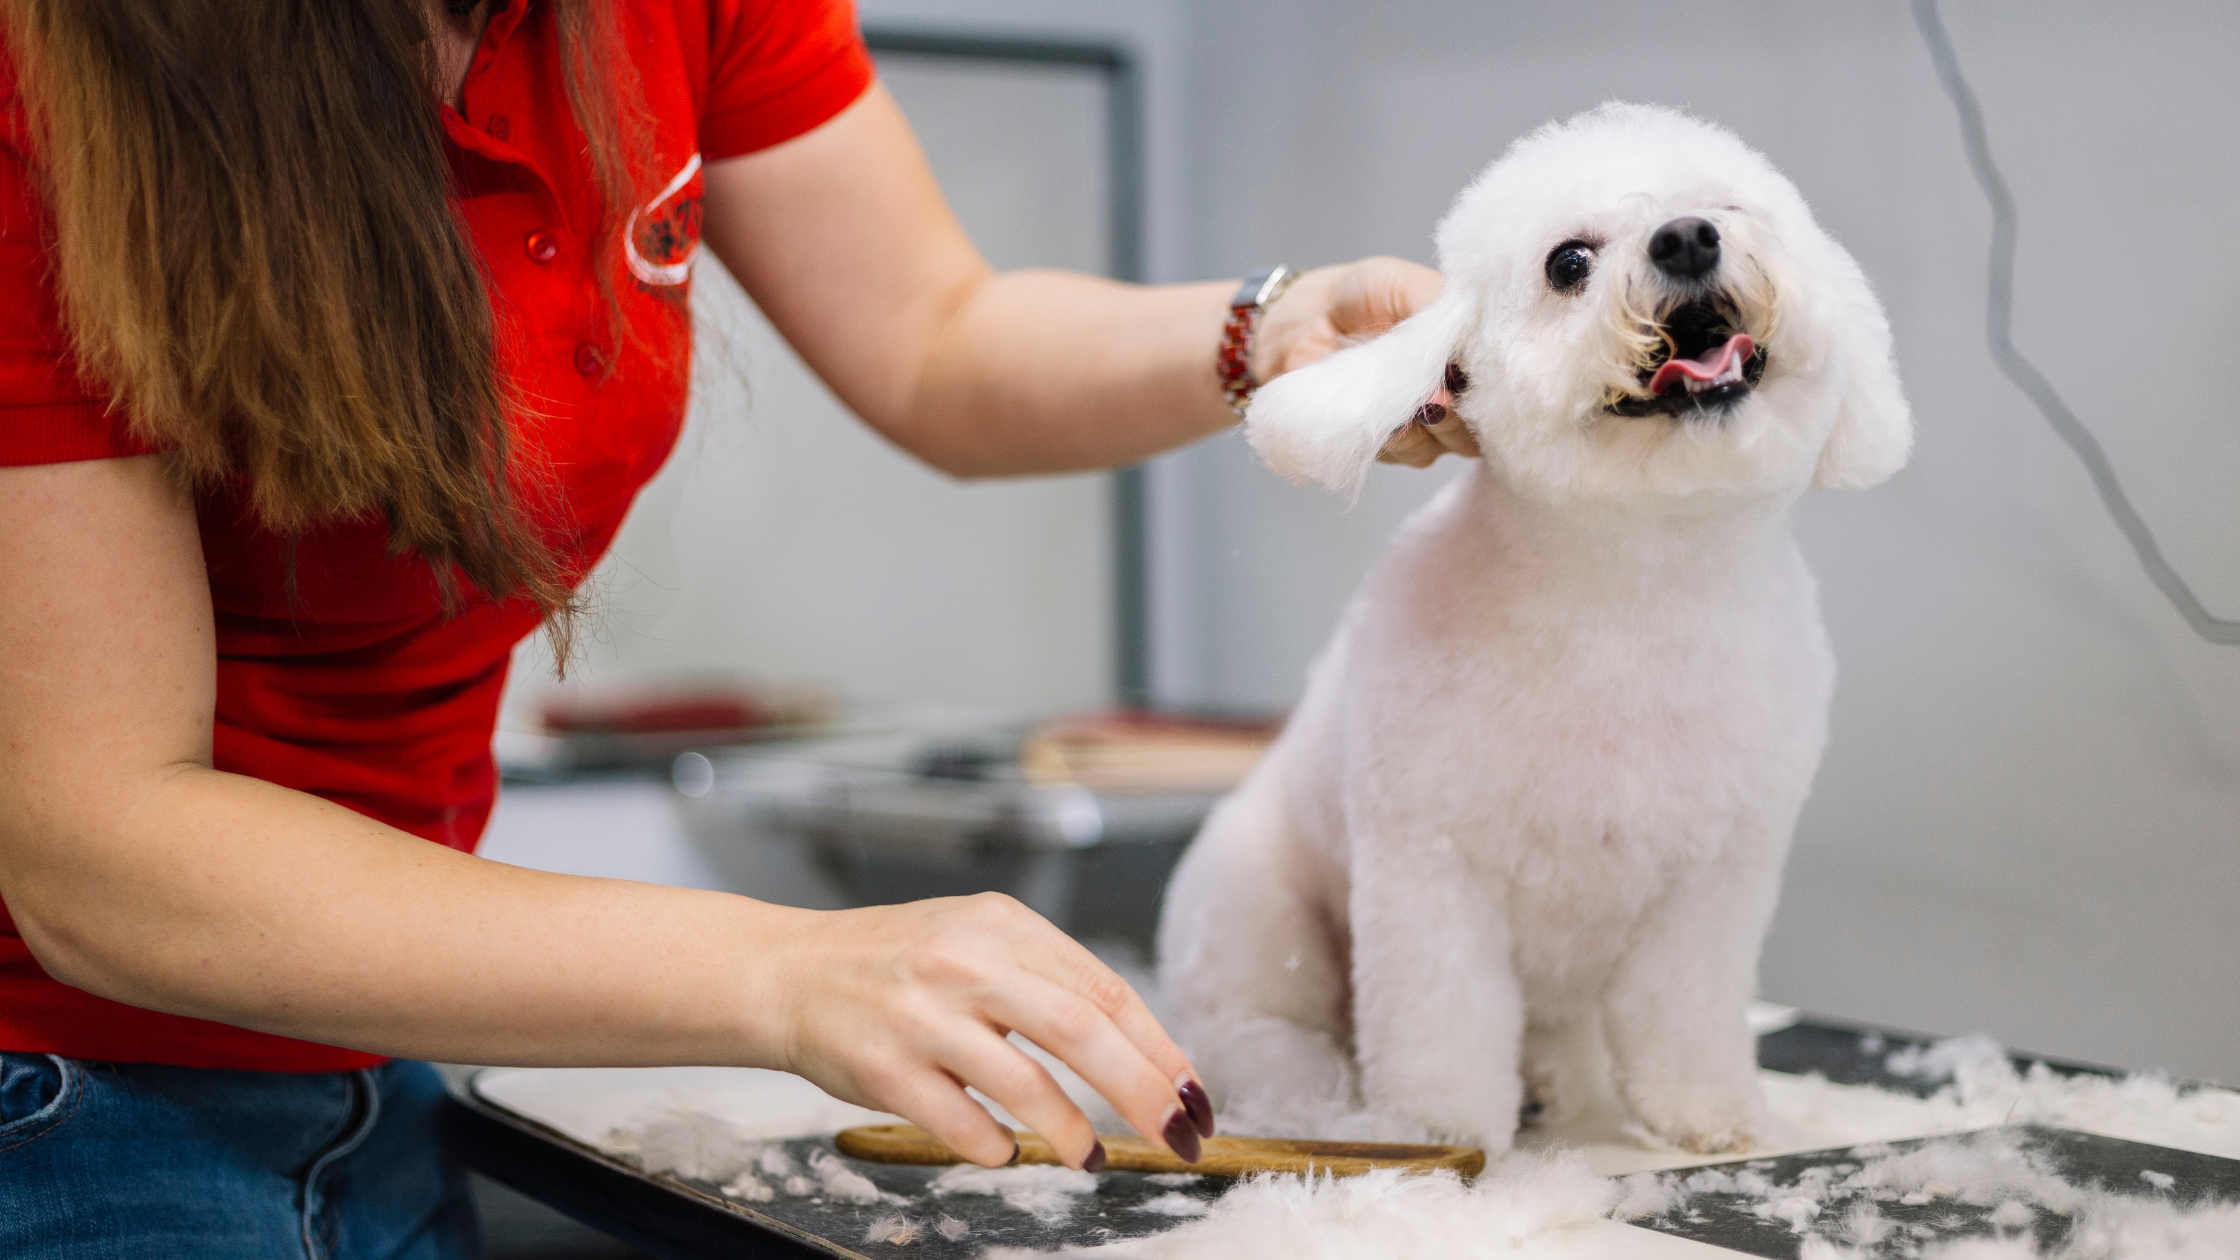 Dog grooming small business idea at home